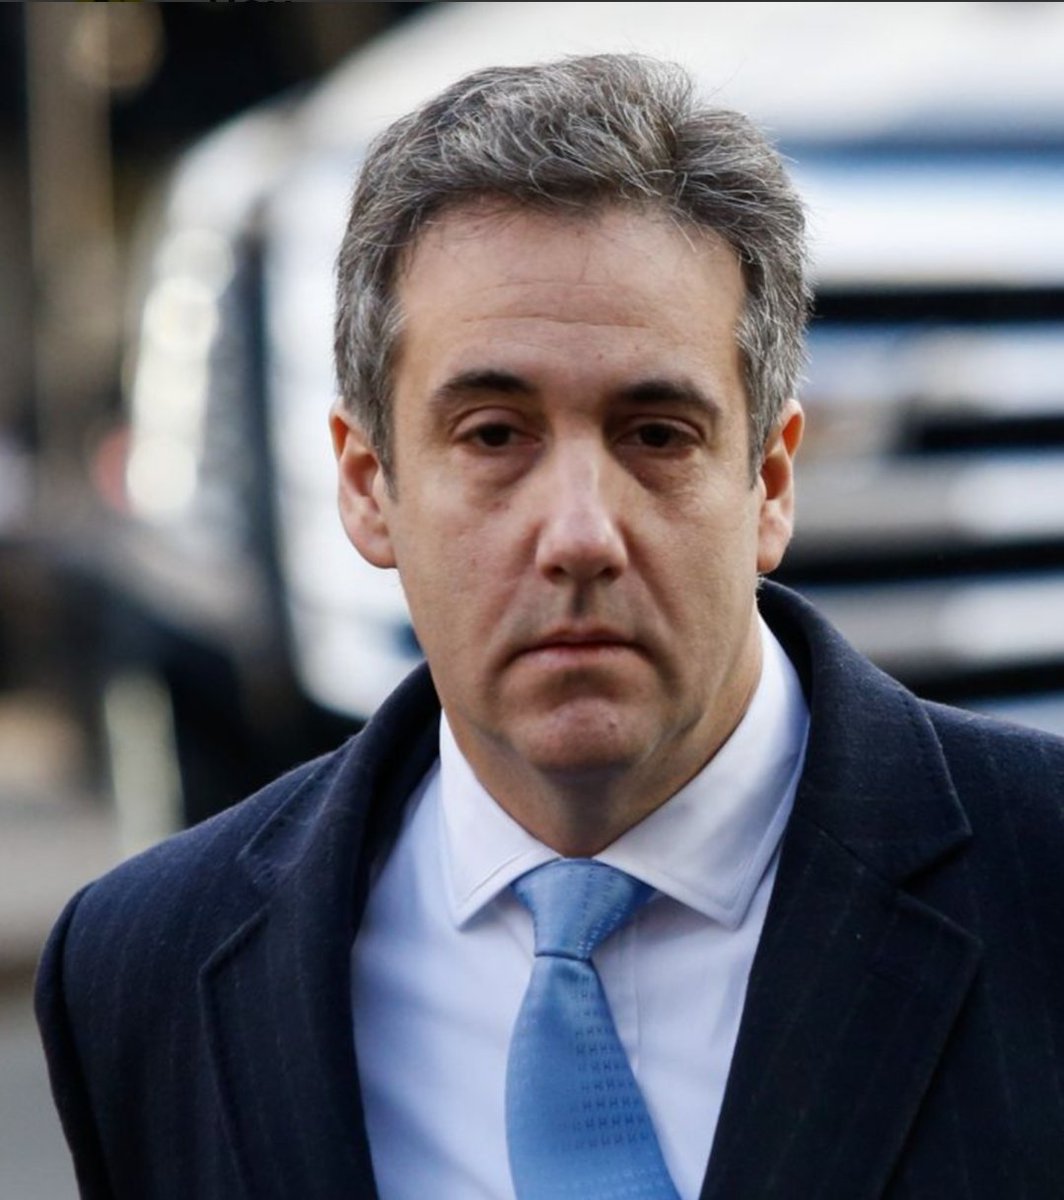 Cohen could face up to 15 years in prison. It's interesting to see the legal drama unfold around Michael Cohen and Donald Trump. The fact that Cohen admitted to stealing money from Trump's company certainly doesn't help his credibility as a witness. It's a classic case of the